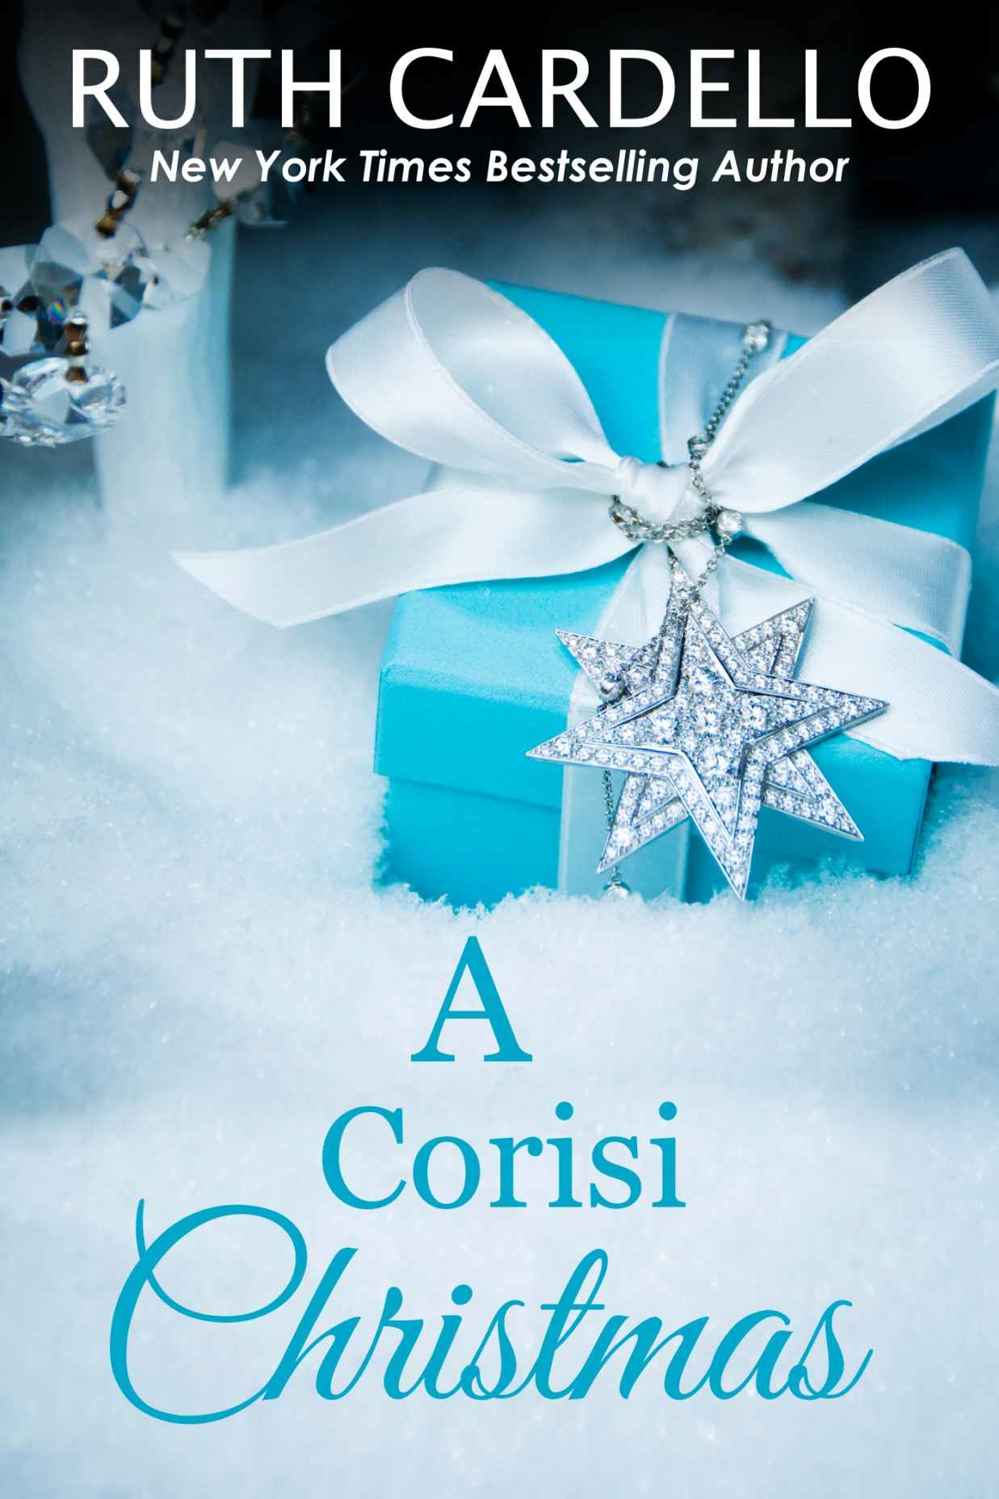 A Corisi Christmas (Legacy Collection #7) by Ruth Cardello